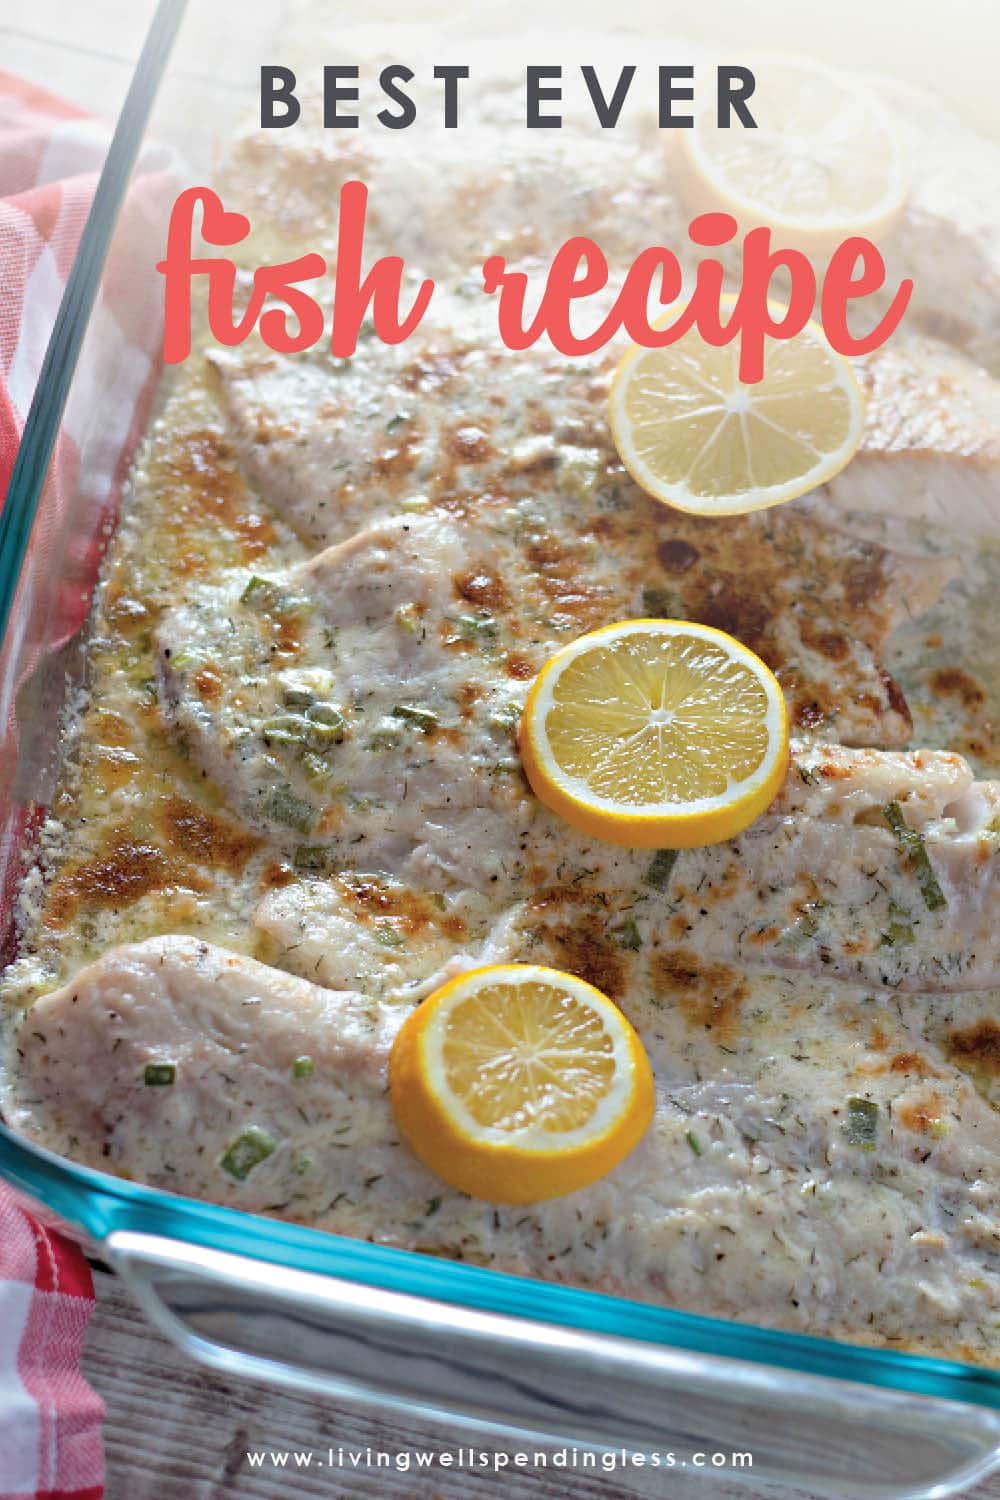 Are you ready to try something new for dinner? This very best fish recipe ever is bursting with savory flavors and is foolproof. Wow your family tonight!